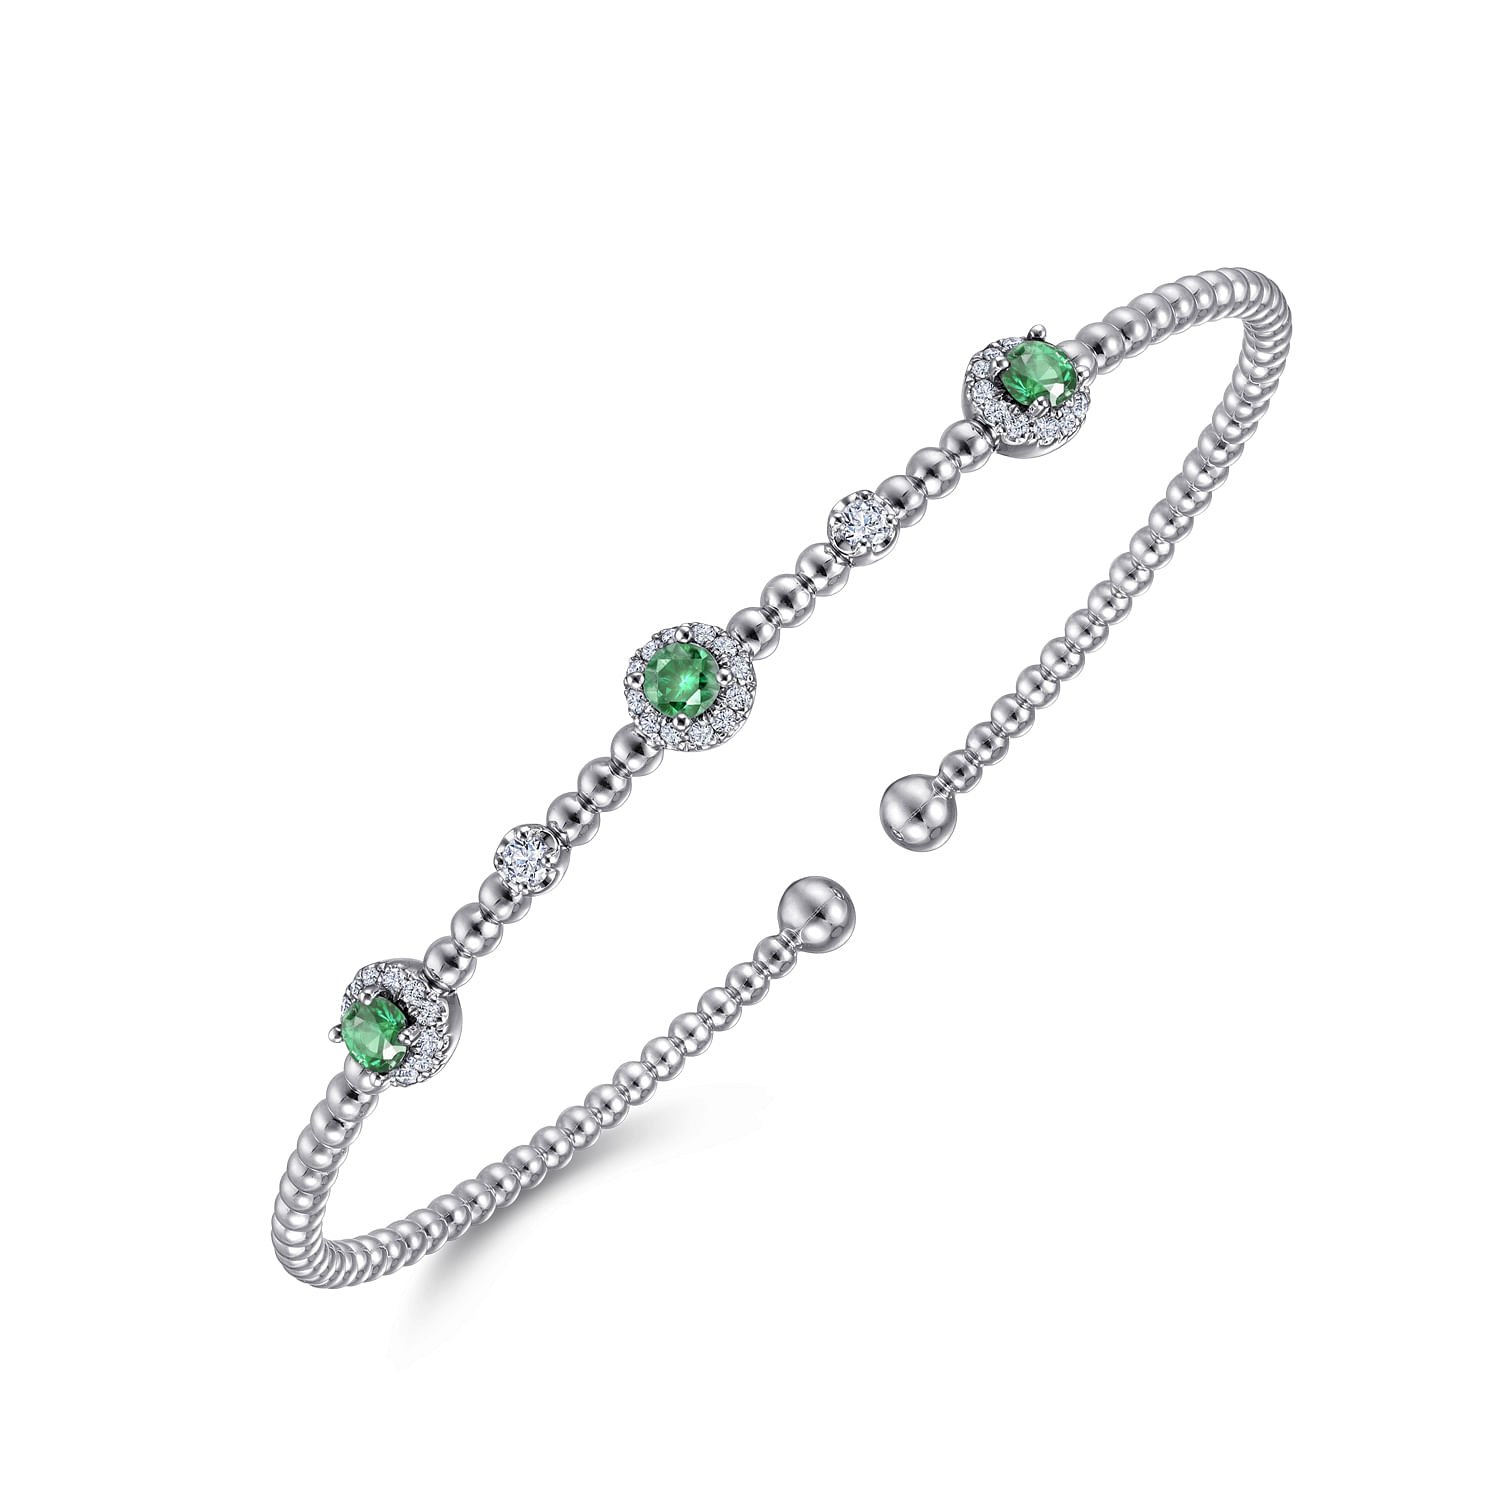 14K White Gold Bujukan Bead Cuff Bracelet with Emerald and Diamond Halo Stations